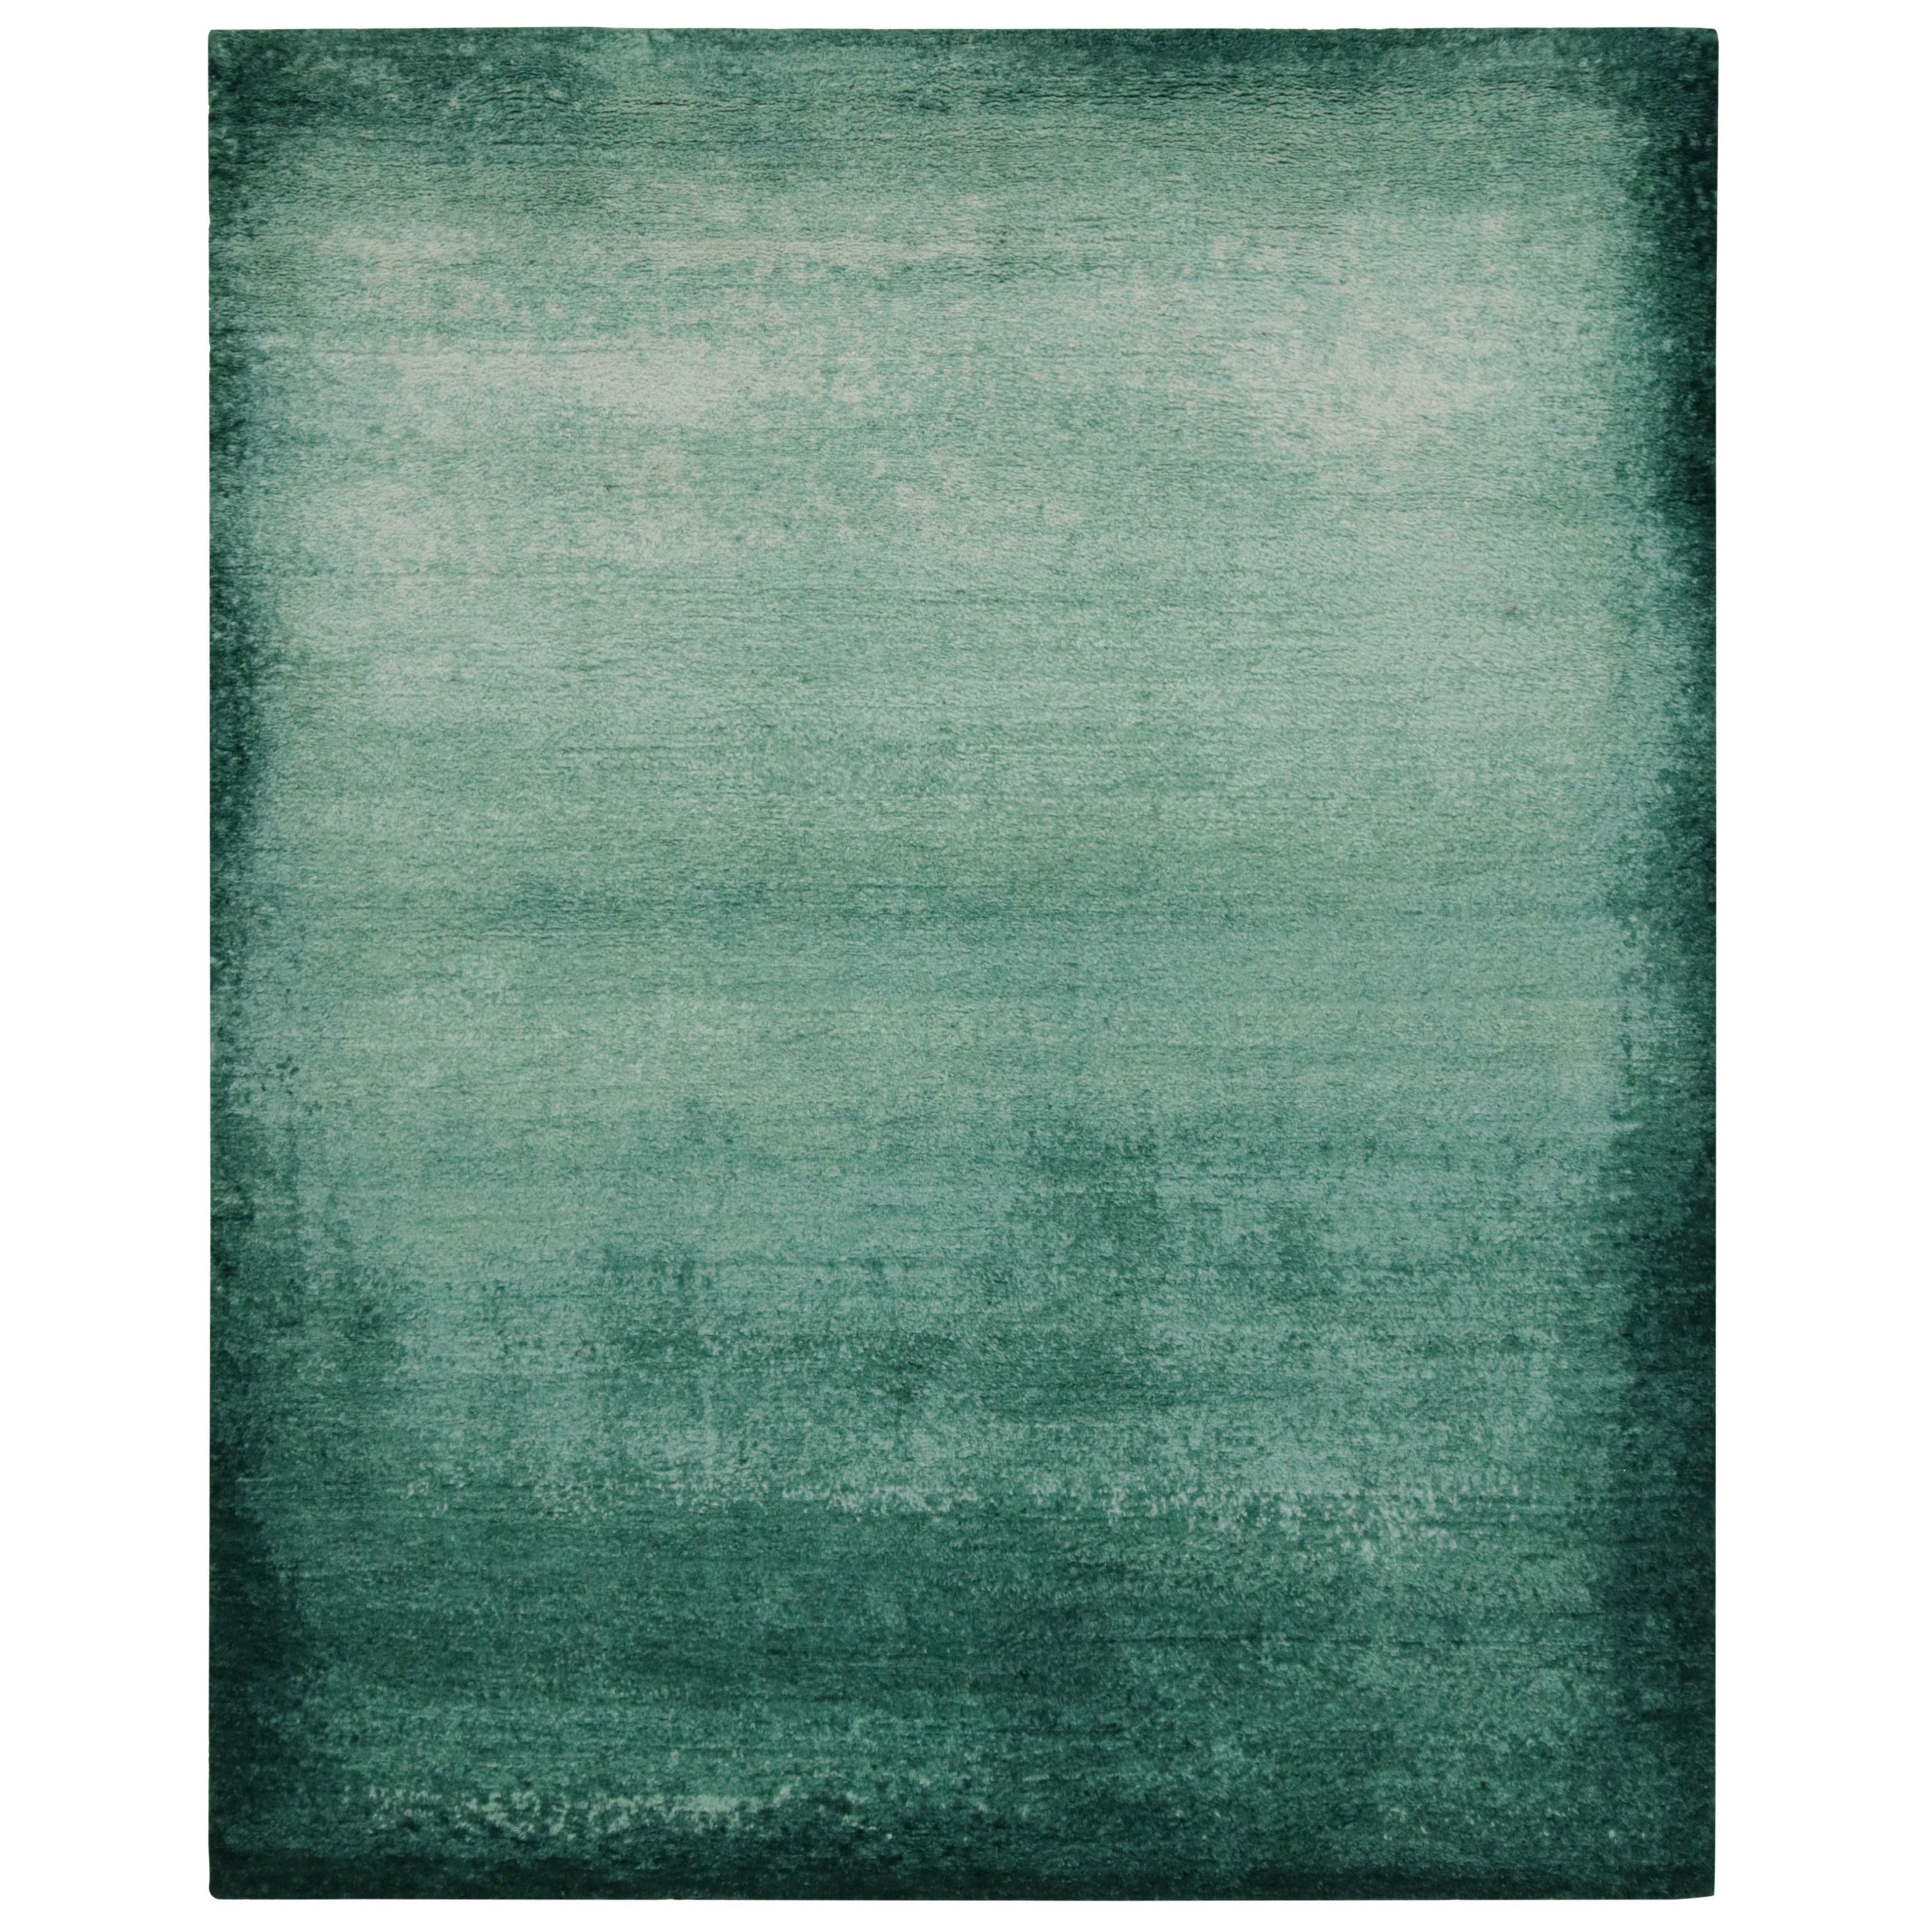 Rug & Kilim’s Contemporary Textural High Pile Rug in Teal Blue and Green For Sale